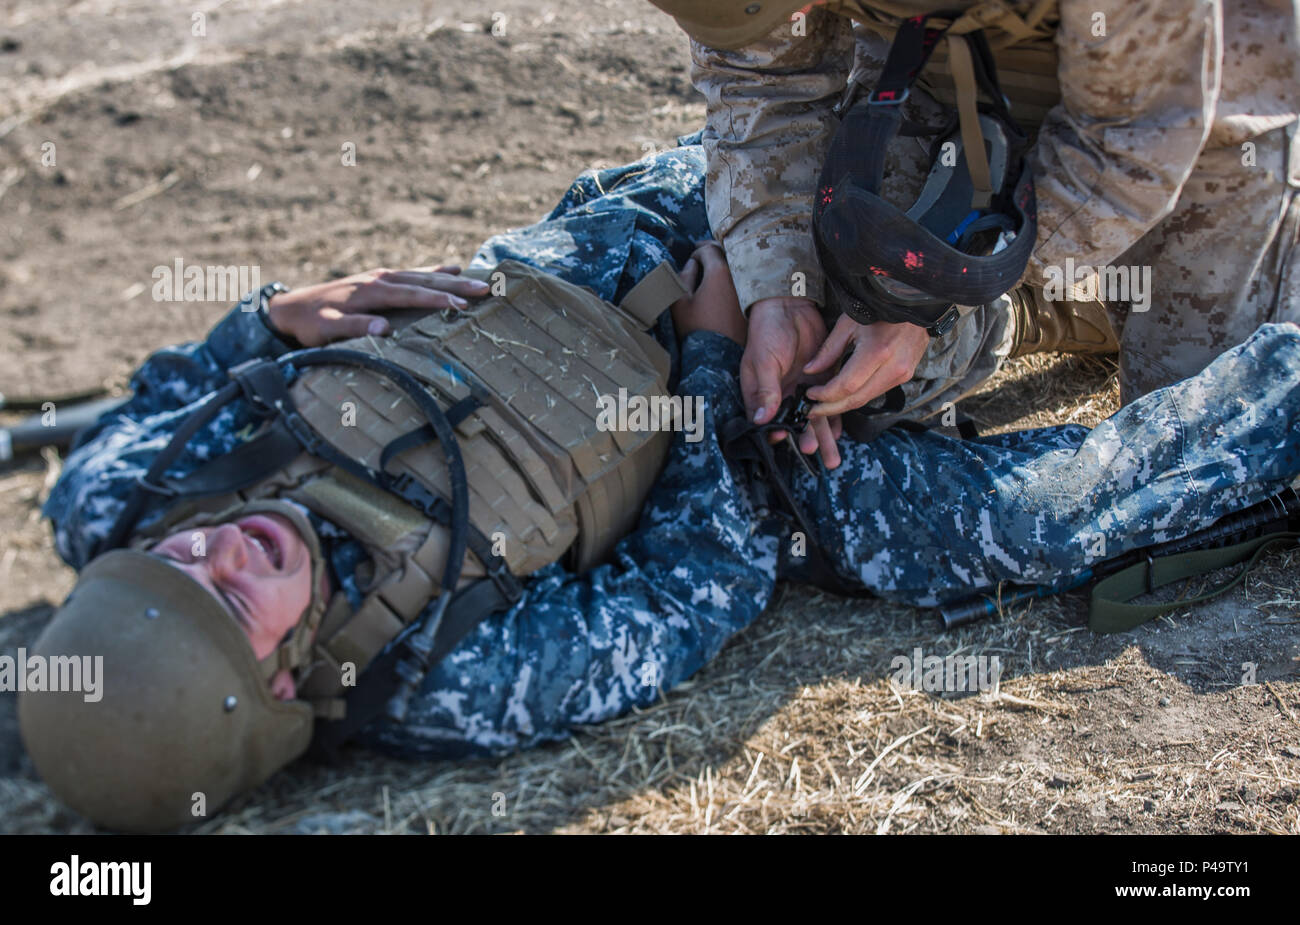 U.S. Midshipman Steven Jones and Russell Jones, both Reserves Officers' Training Corps (ROTC) students at the University of Colorado and the University of Huston, practice applying tourniquets for a Combat Life Savors Course during Career Orientation and Training for Midshipmen (CORTRAMID) West on Camp Pendleton, Calif., June 16, 2016. Midshipmen conduct training to expose future Navy and Marine Corps officers to the capabilities of the Marine Air Ground Task Force. (U.S. Marine Corps photo by Pfc. Rhita Daniel/Released) Stock Photo